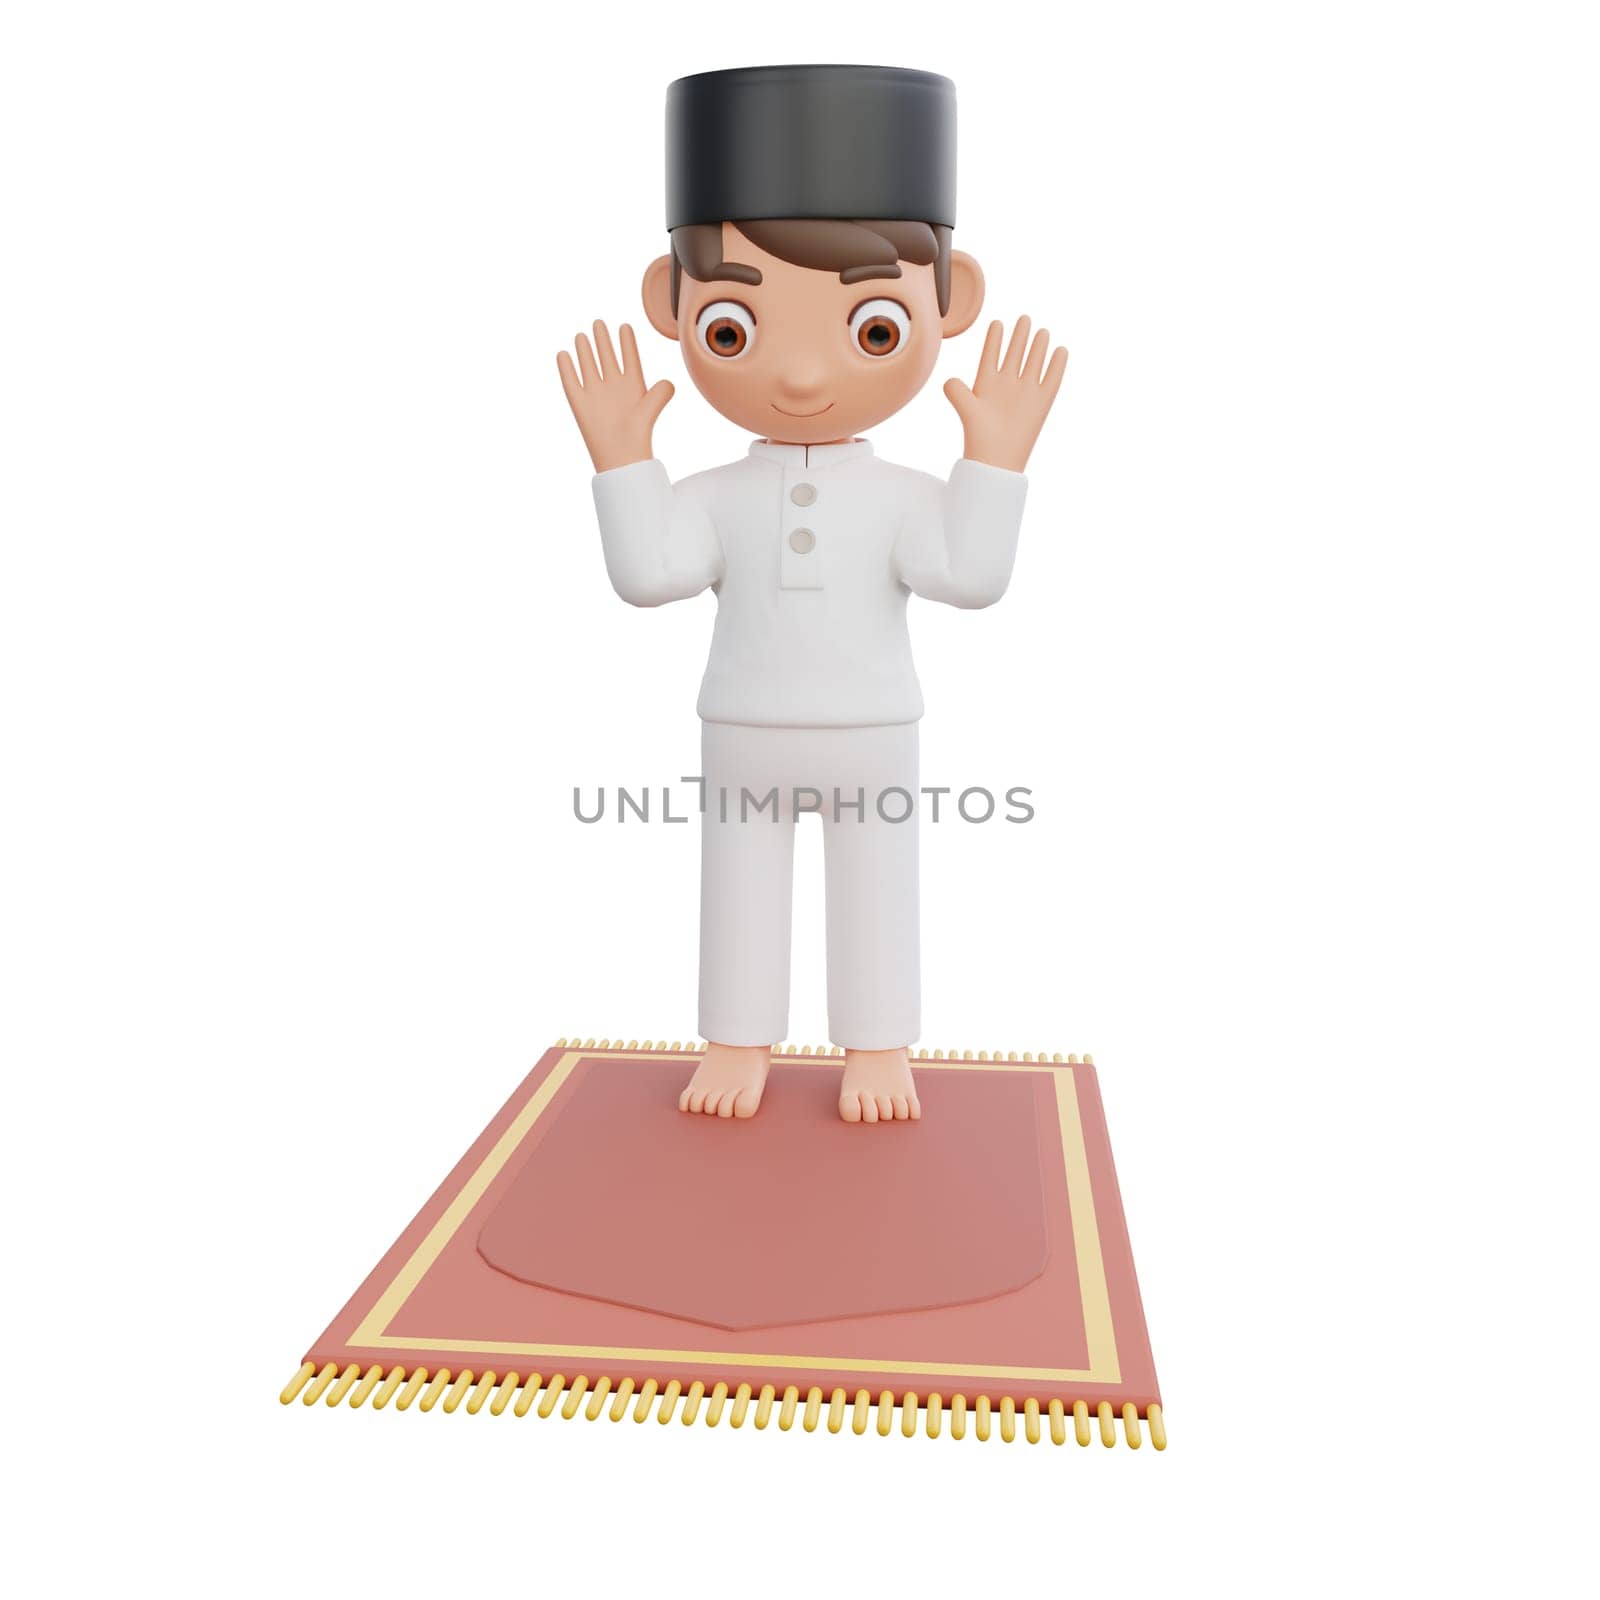 3D Illustration of Muslim character performing prayer movements on a prayer mat, perfect for Ramadan kareem themed projects